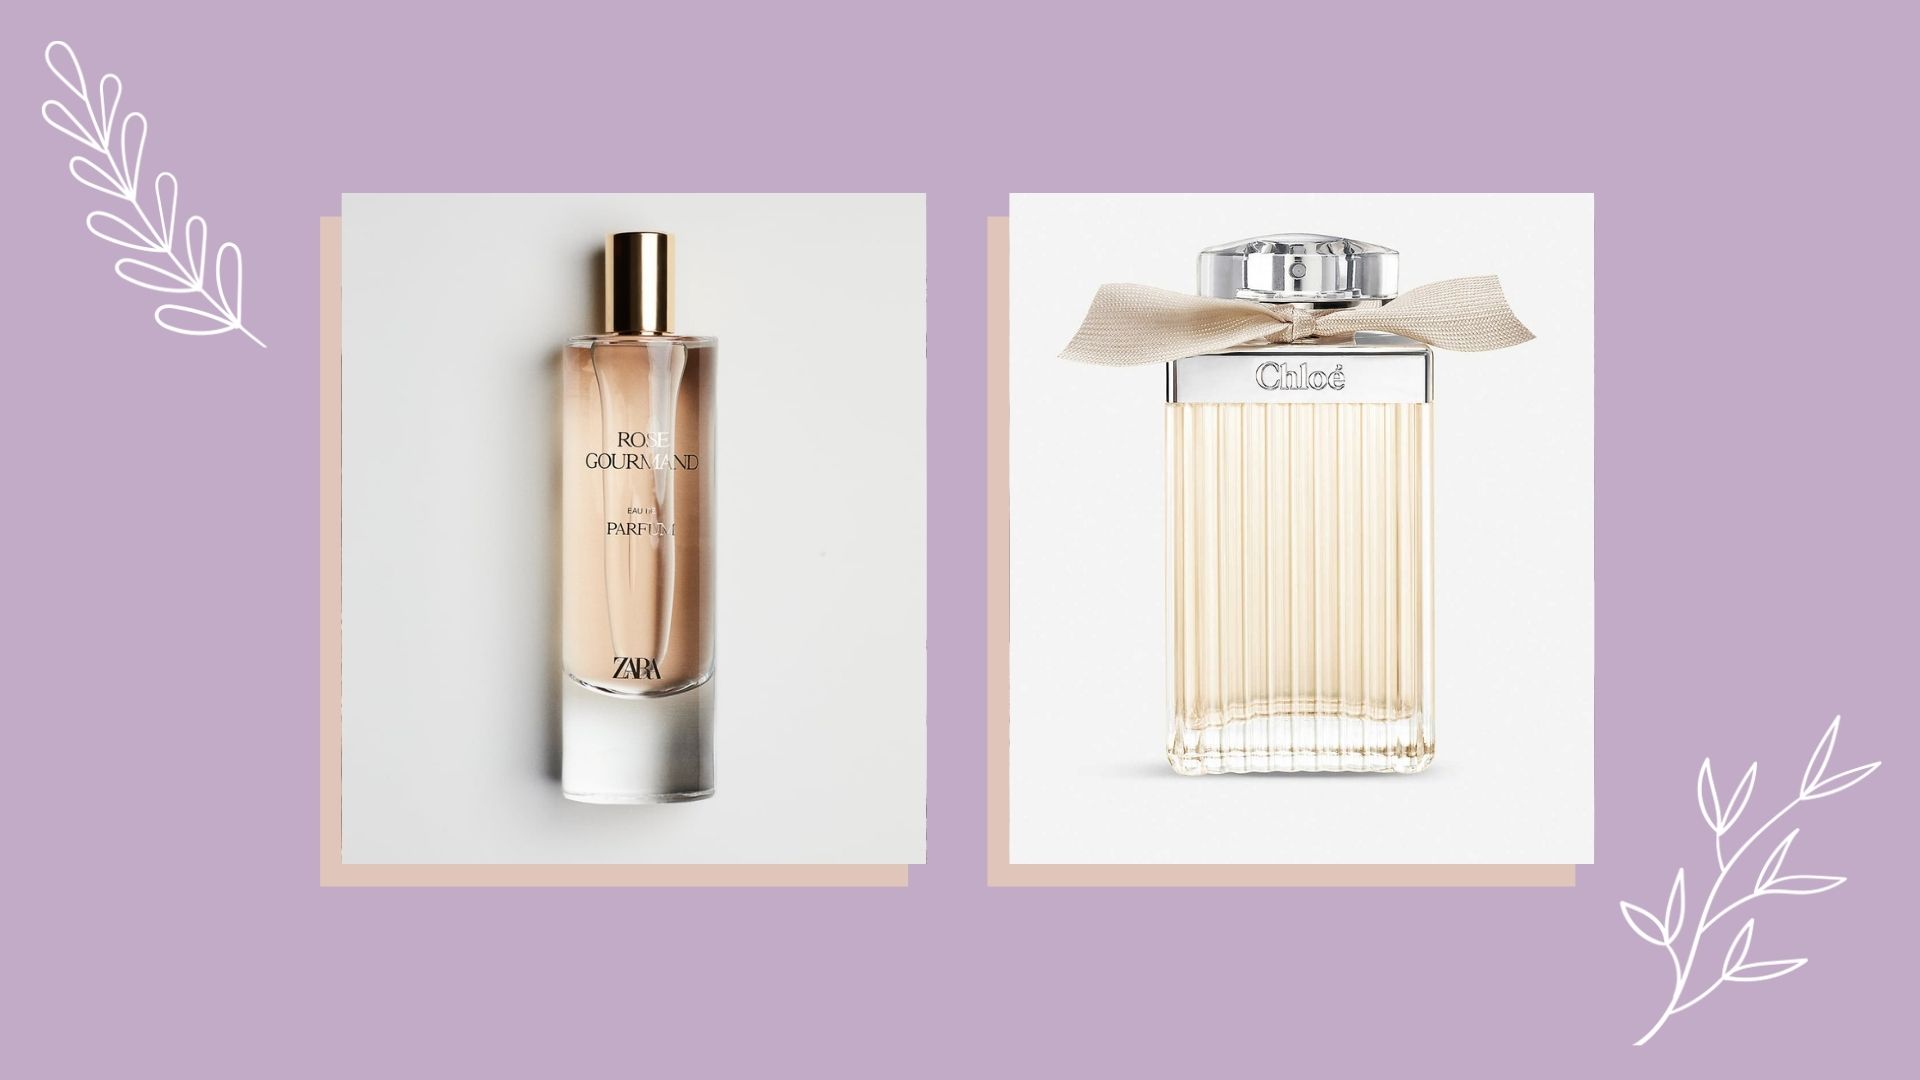 This Zara fragrance is a dupe of the Chloé perfume we all love